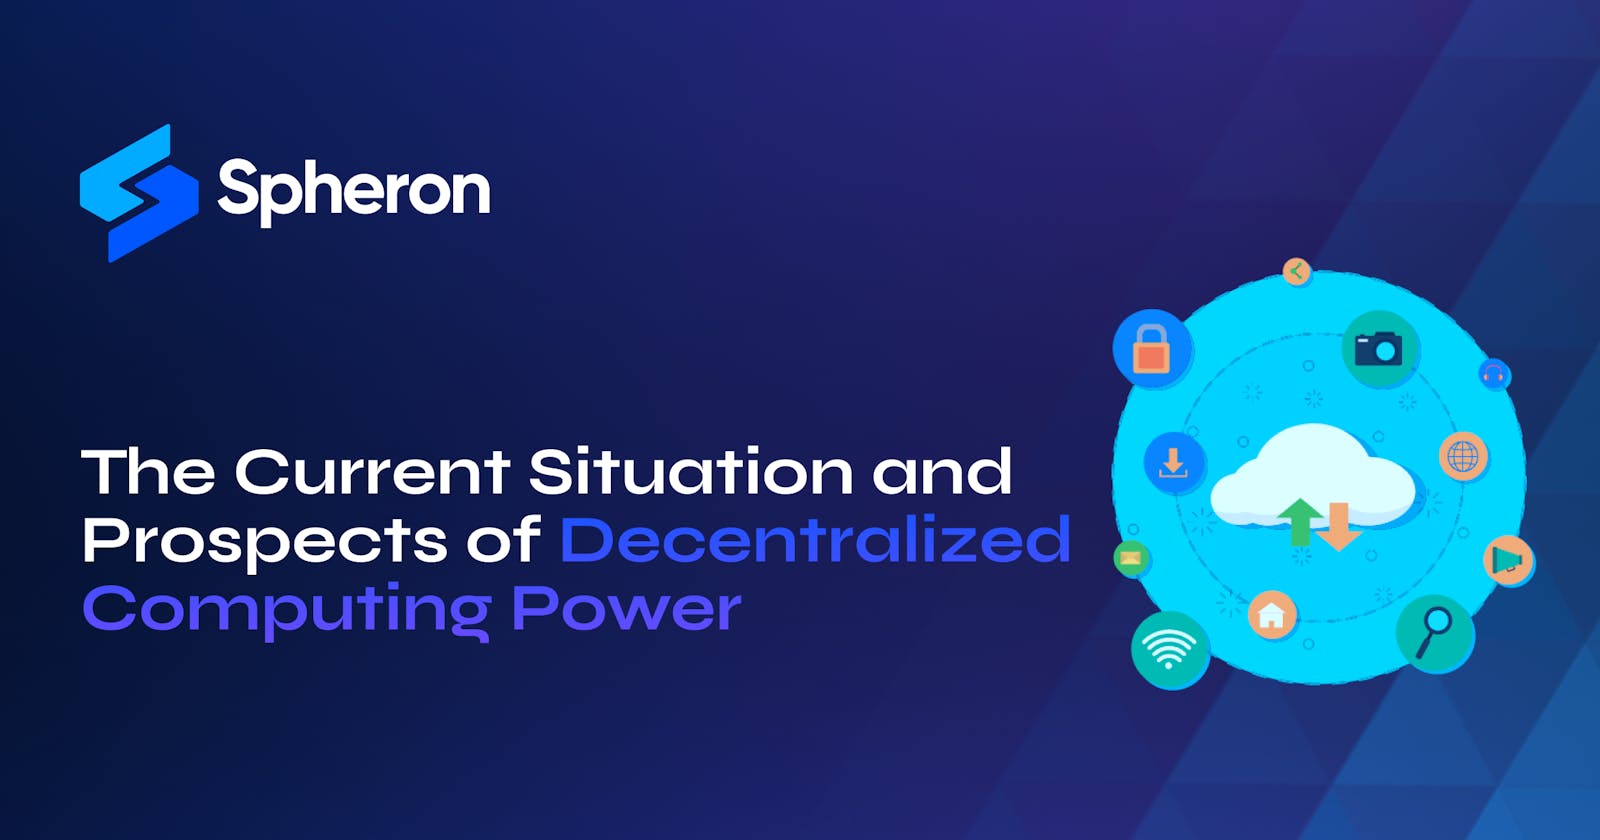 The Current Situation and Prospects of Decentralized Computing Power